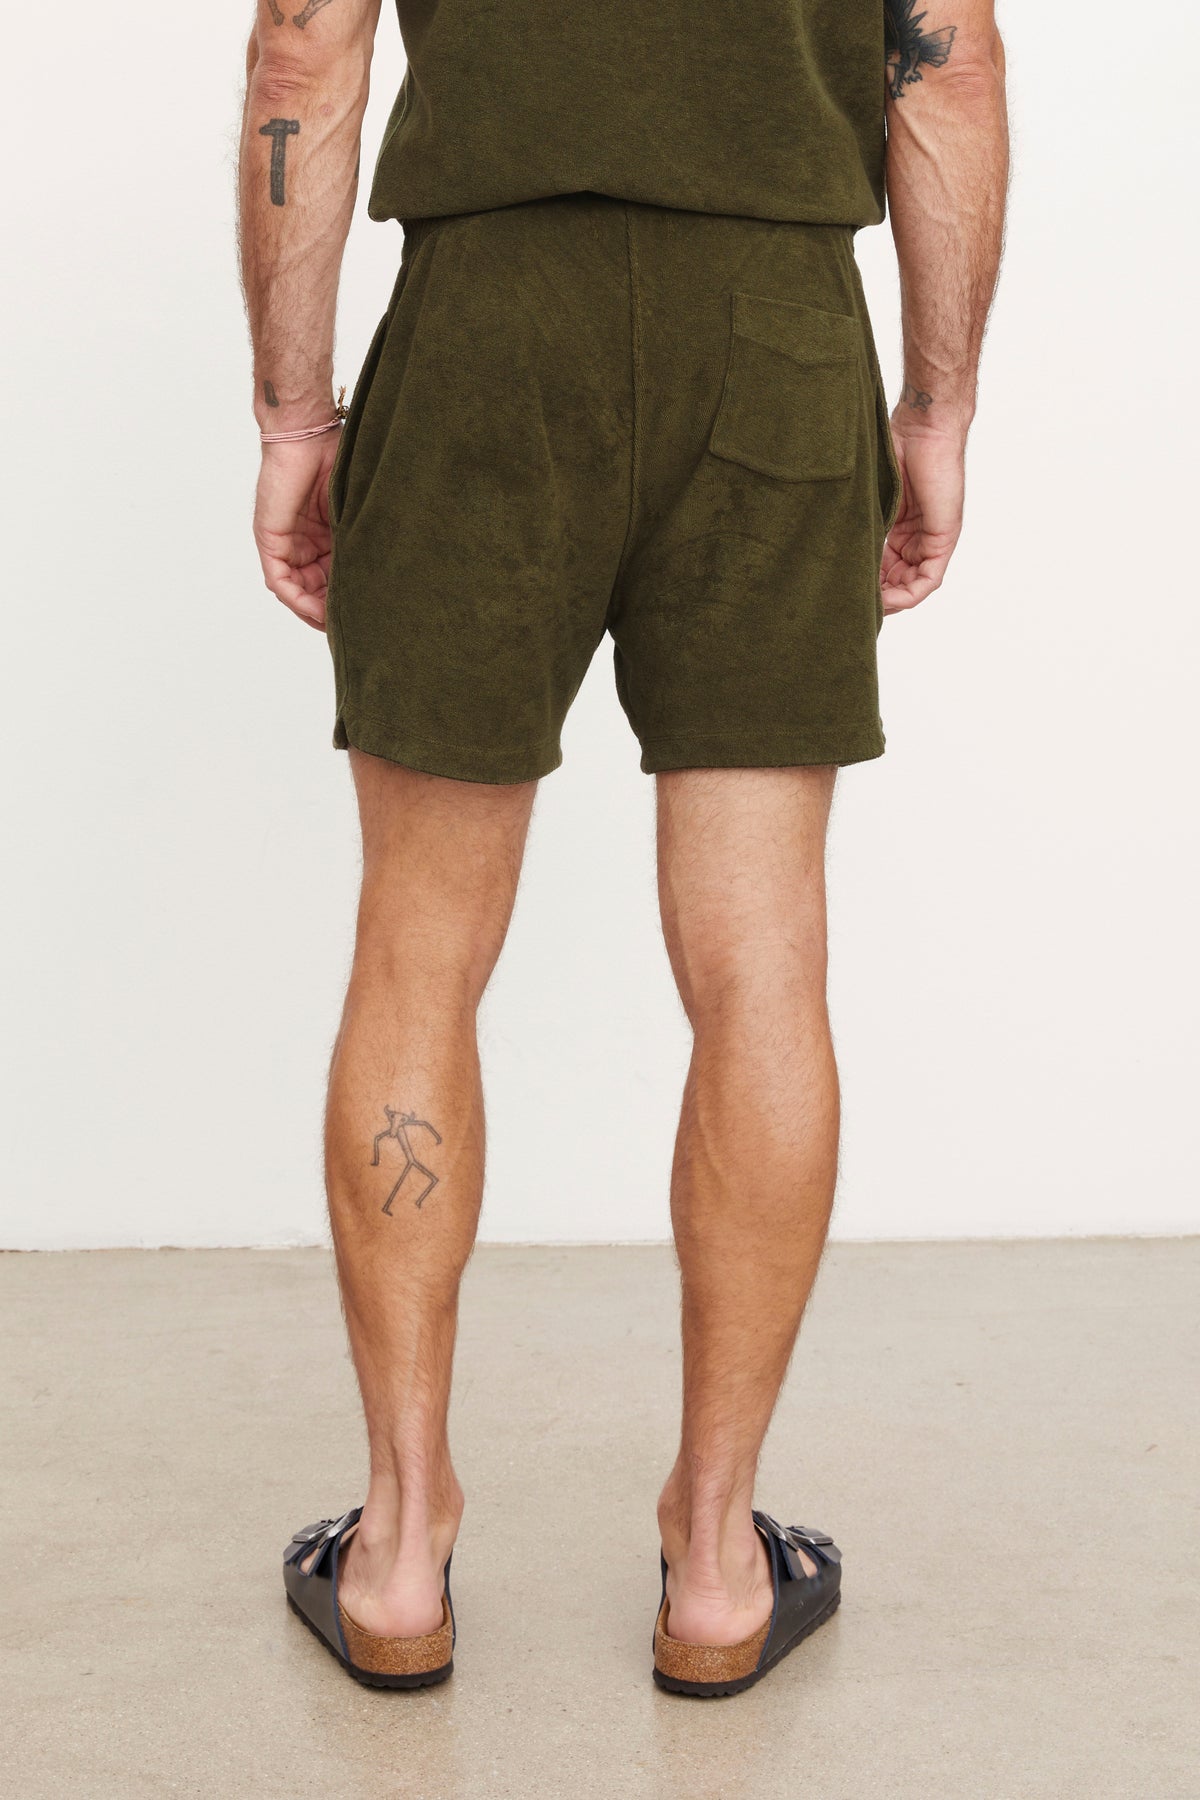 Rear view of a man wearing Velvet by Graham & Spencer's Salem shorts and brown loafers, standing with hands slightly behind him, highlighting visible tattoos on his arms and legs.-36753587732673